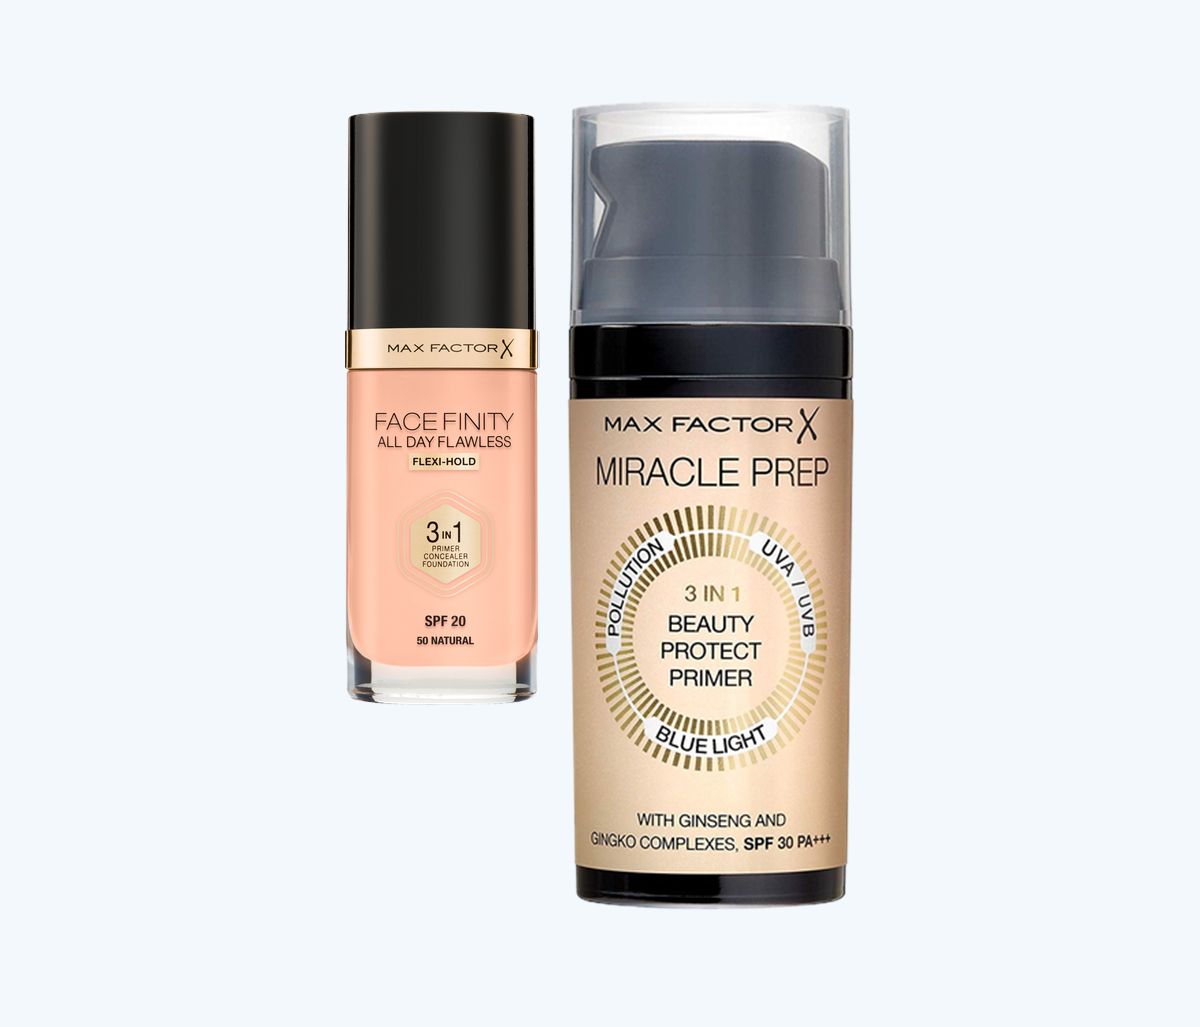 Max Factor, Facefinity All Day Flawless 3 В 1; Miracle Prep 3 в 1 Beauty Protect Primer